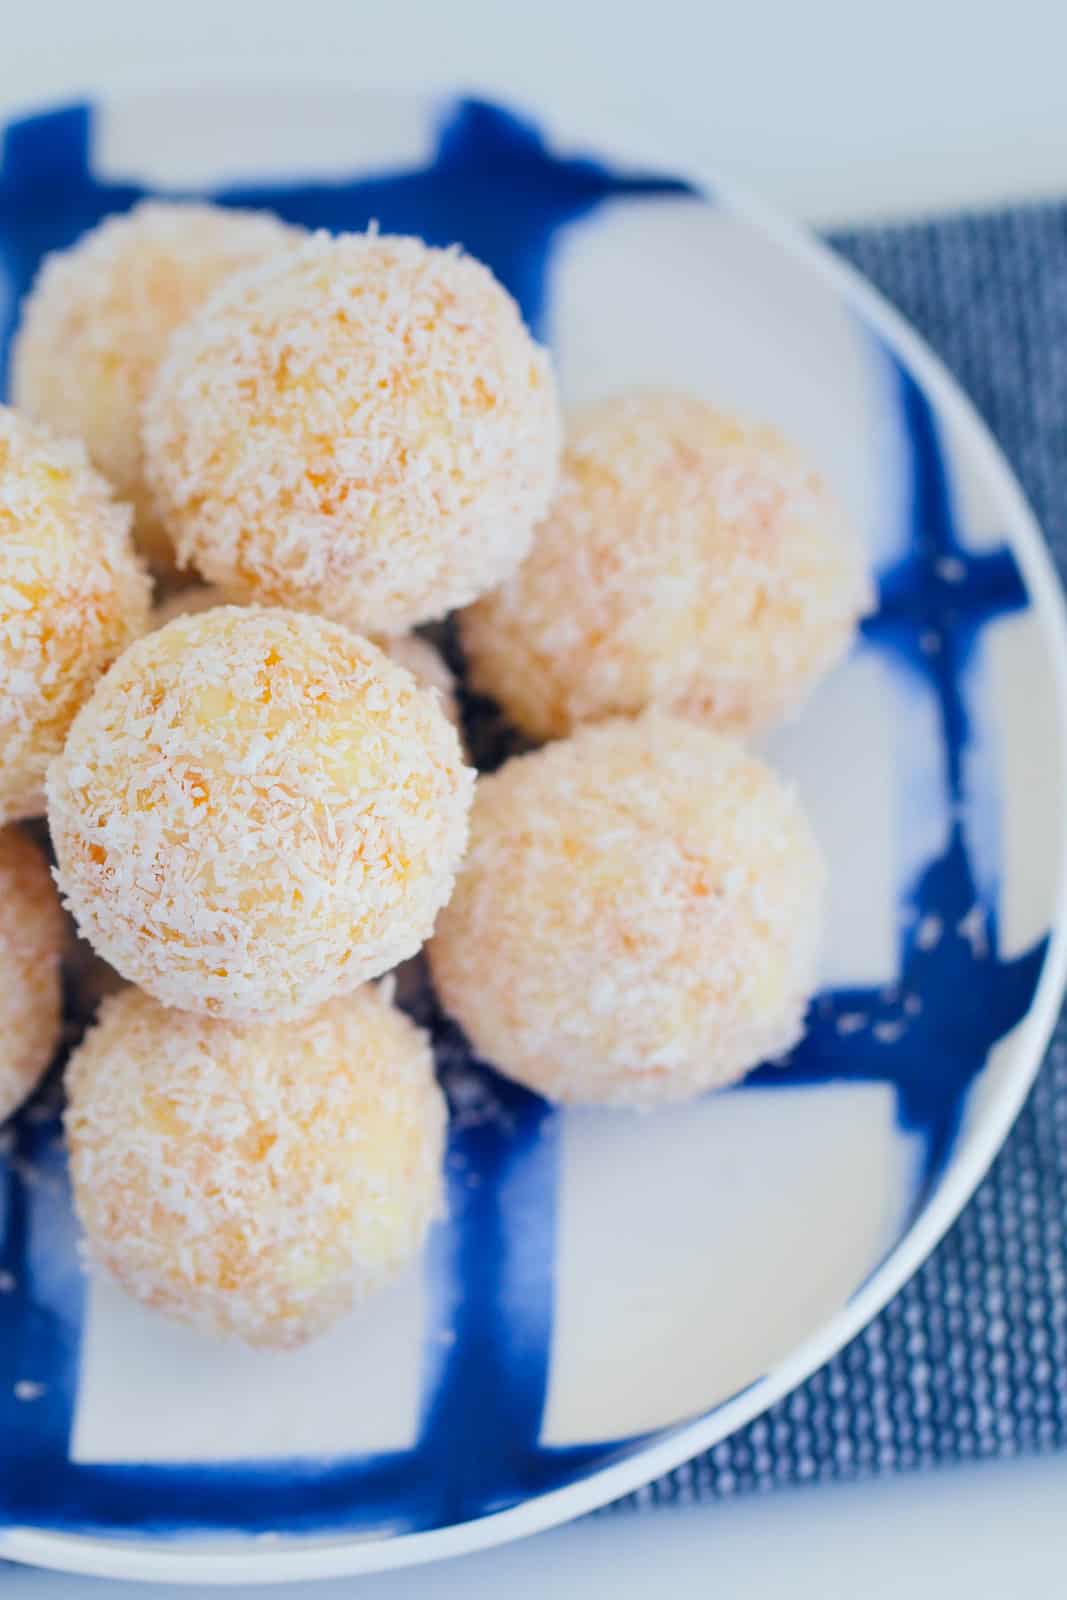 A downwards photo of a plate of coconut balls with chocolate and apricot on a blue and white plate.